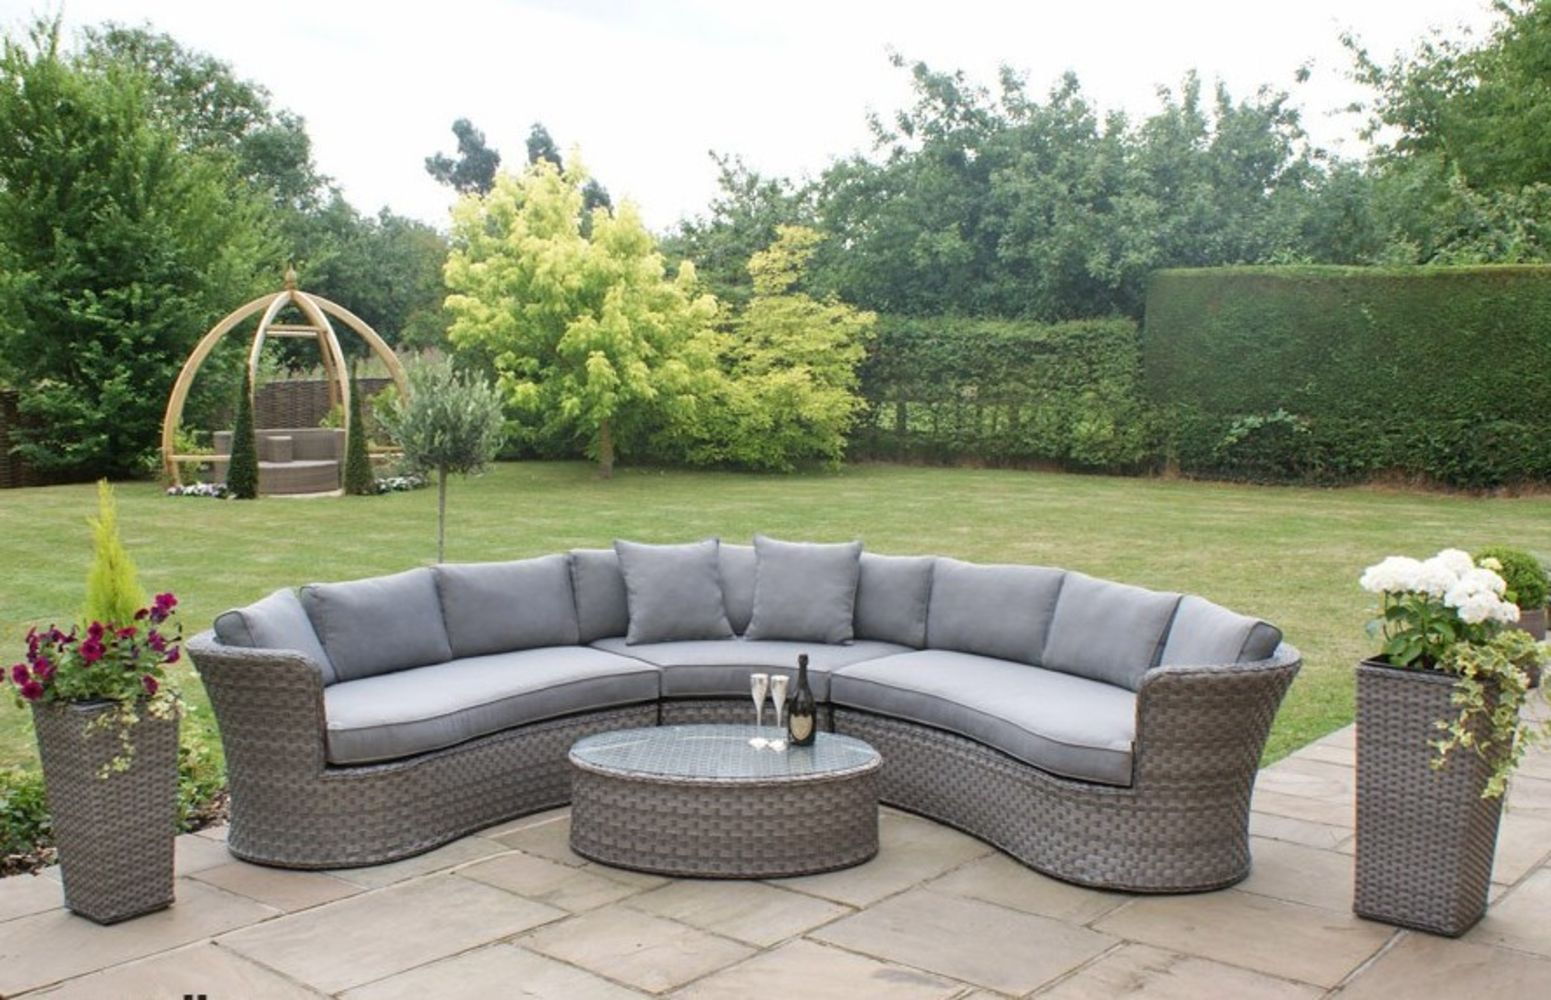 "The Chelsea Garden Co" - Brand New Rattan Garden Furniture & Patio Heaters: Dining Sets, Sofa Sets, Sun Loungers, Egg Chairs and More